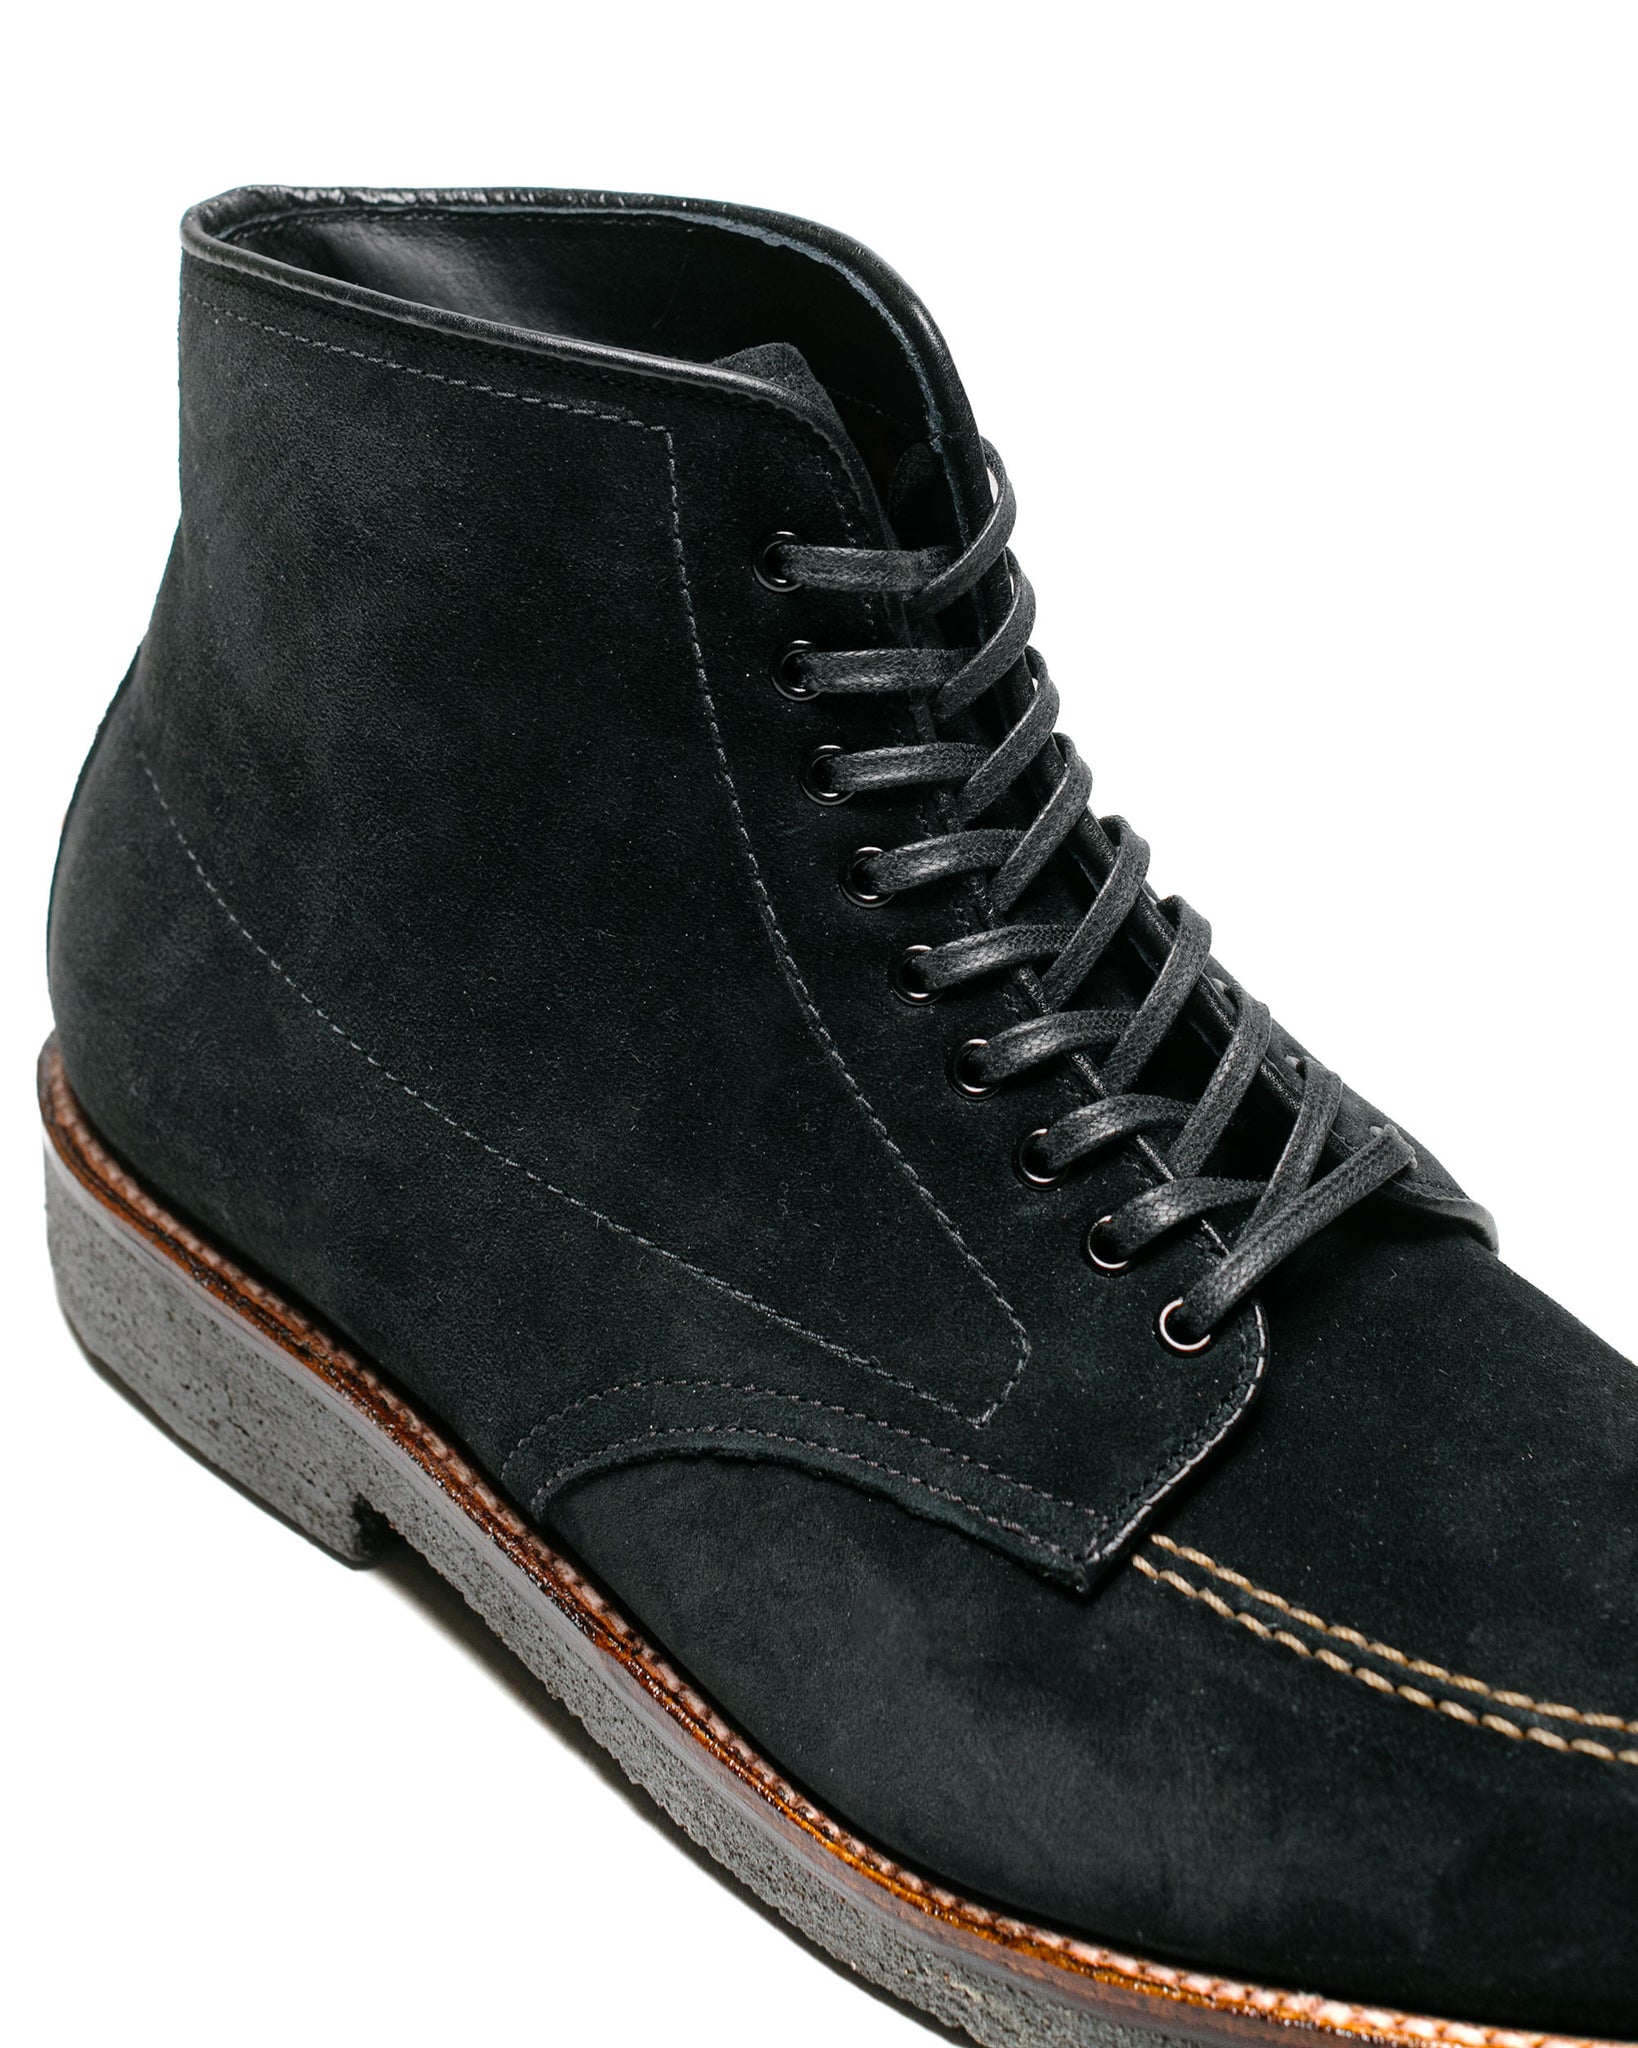 Alden Indy Boot Black Suede with Crepe Sole close